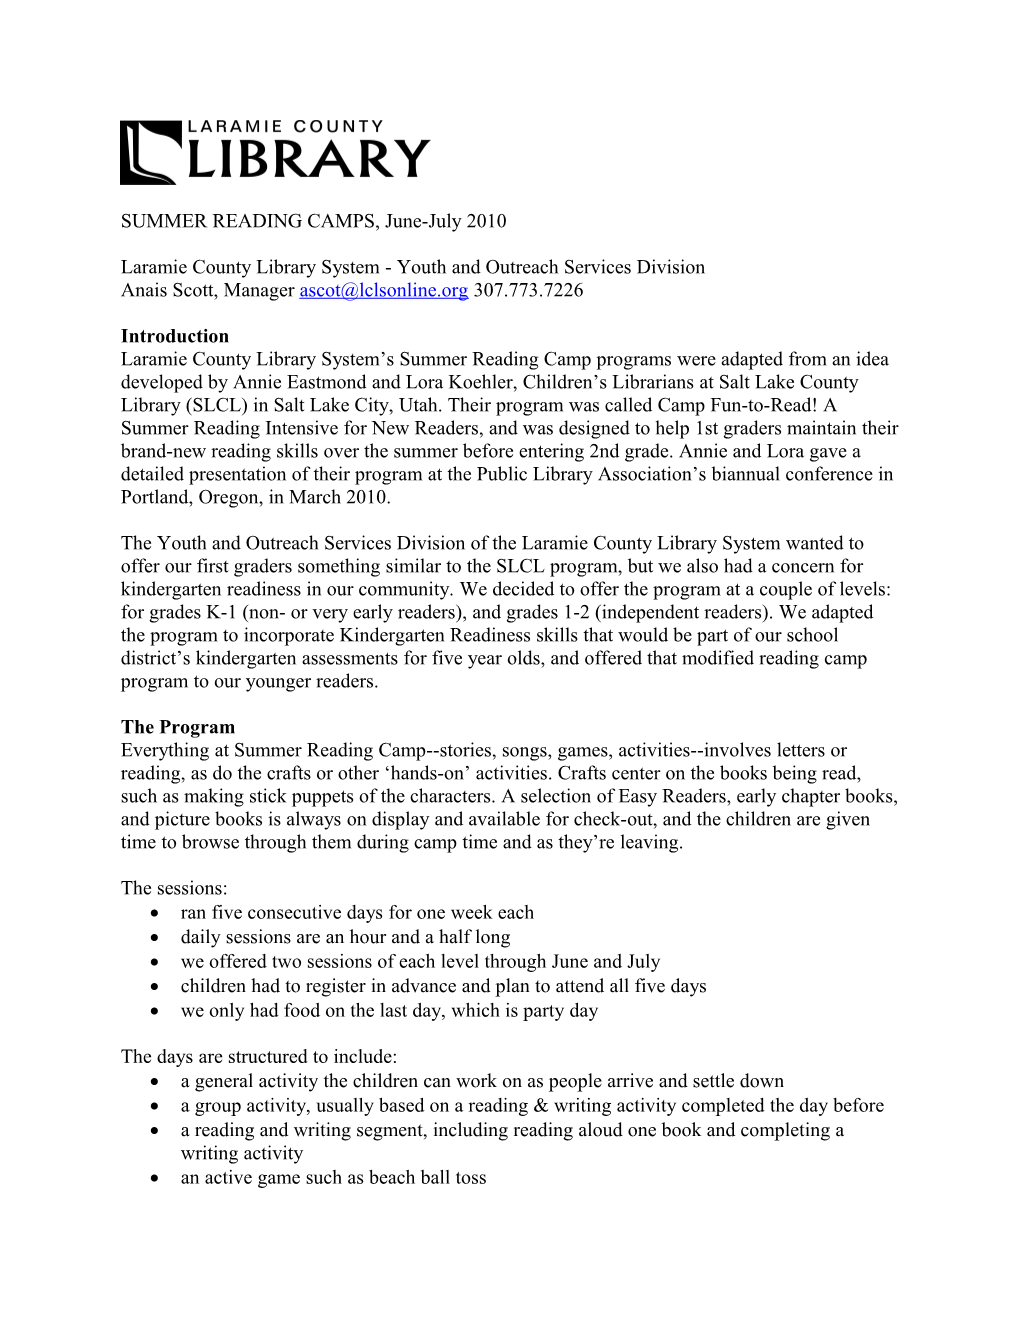 Laramie County Library System - Youth and Outreach Services Division